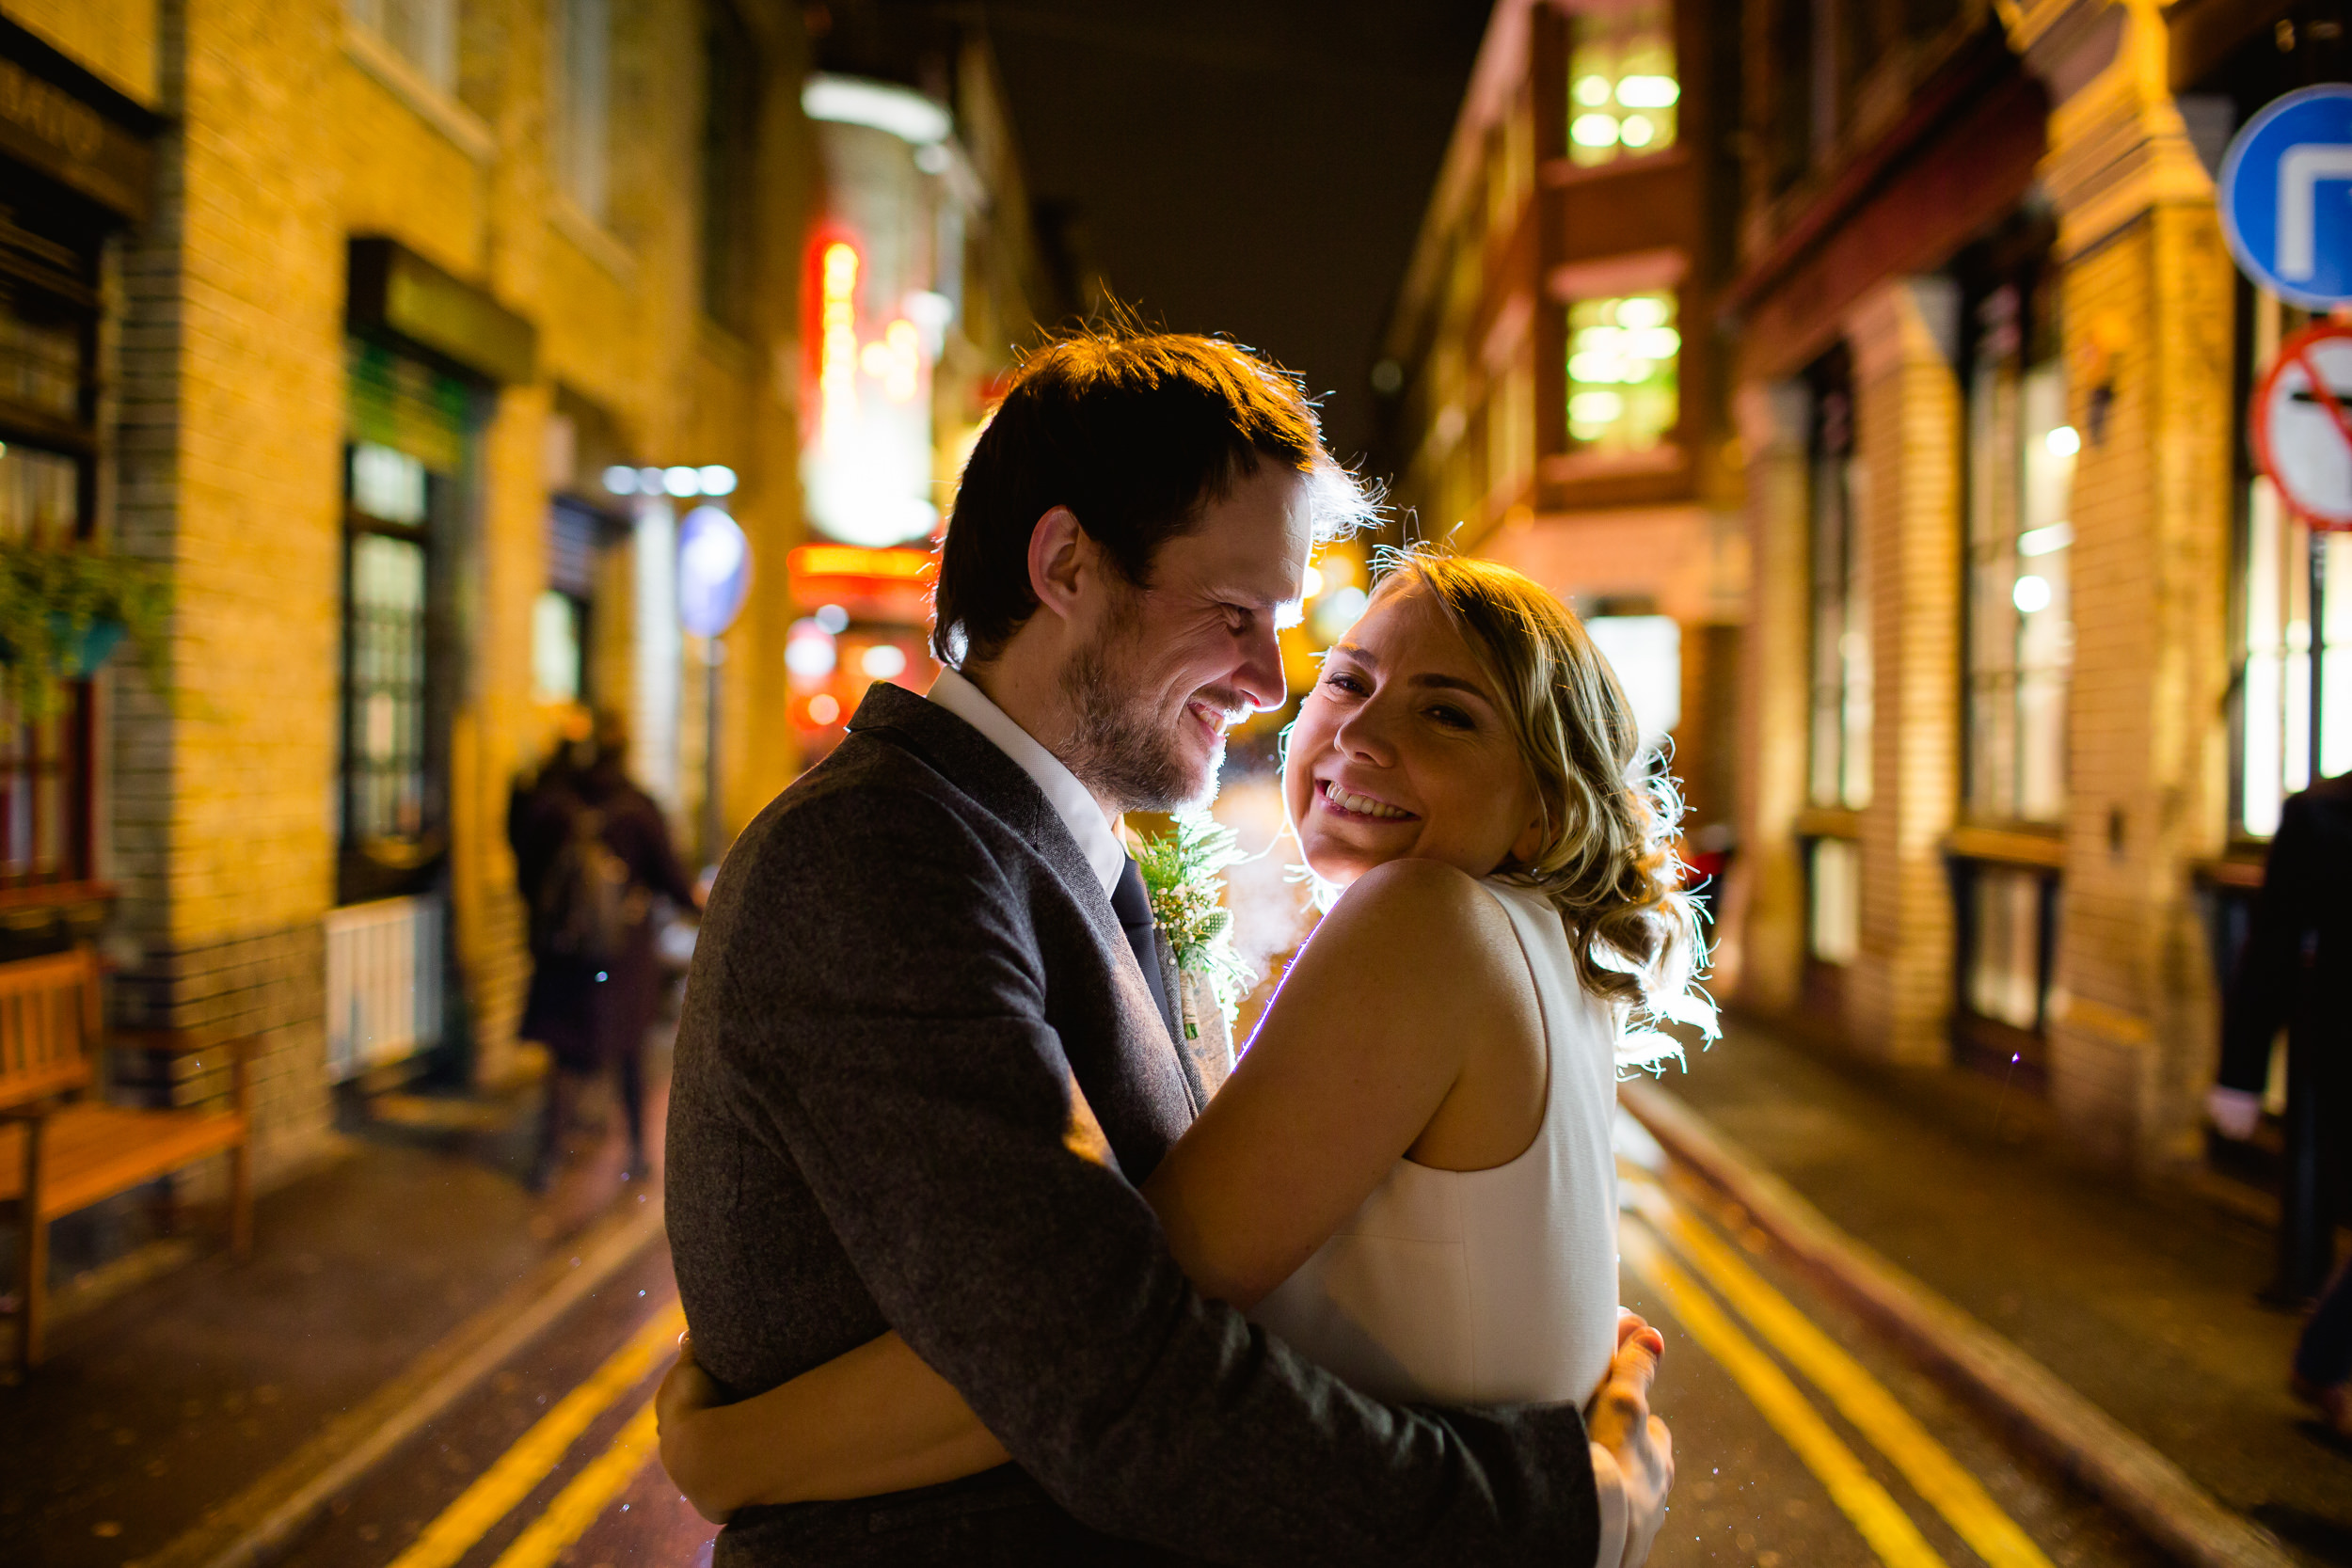 Romantic pictures at Tramshed London - London wedding pictures - Tramshed wedding